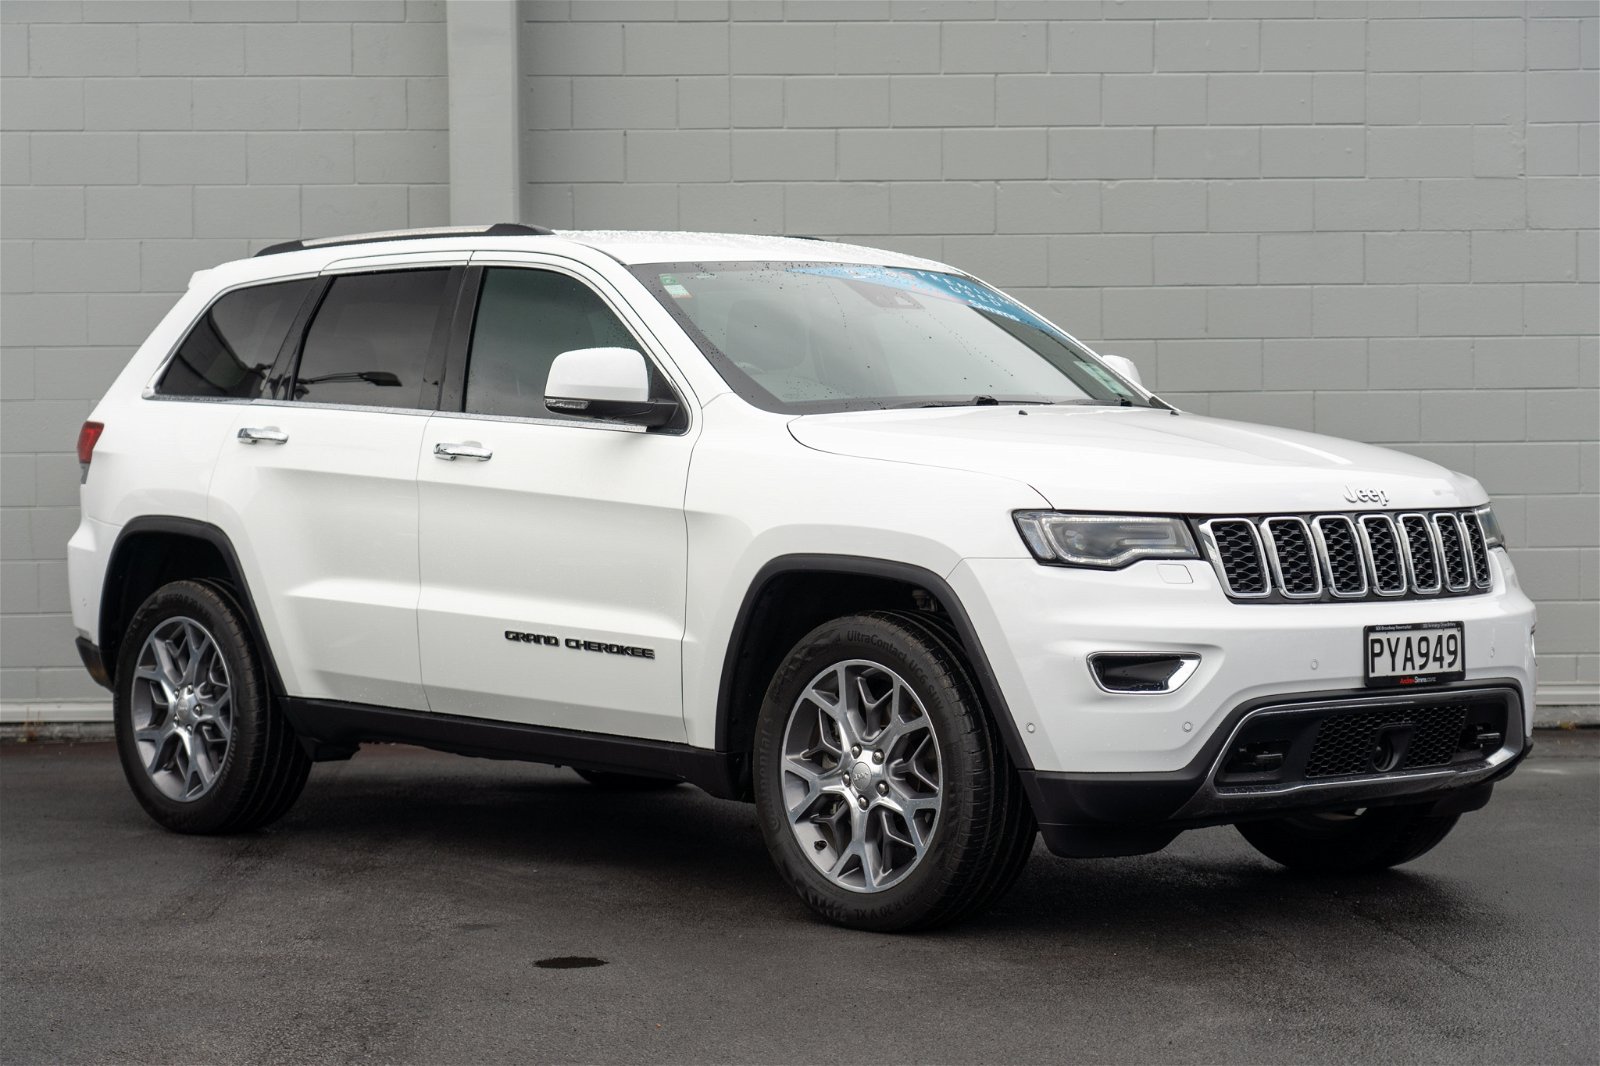 2020 Jeep Grand Cherokee Limited 3.0D 4WD 8A 5Dr Wagon